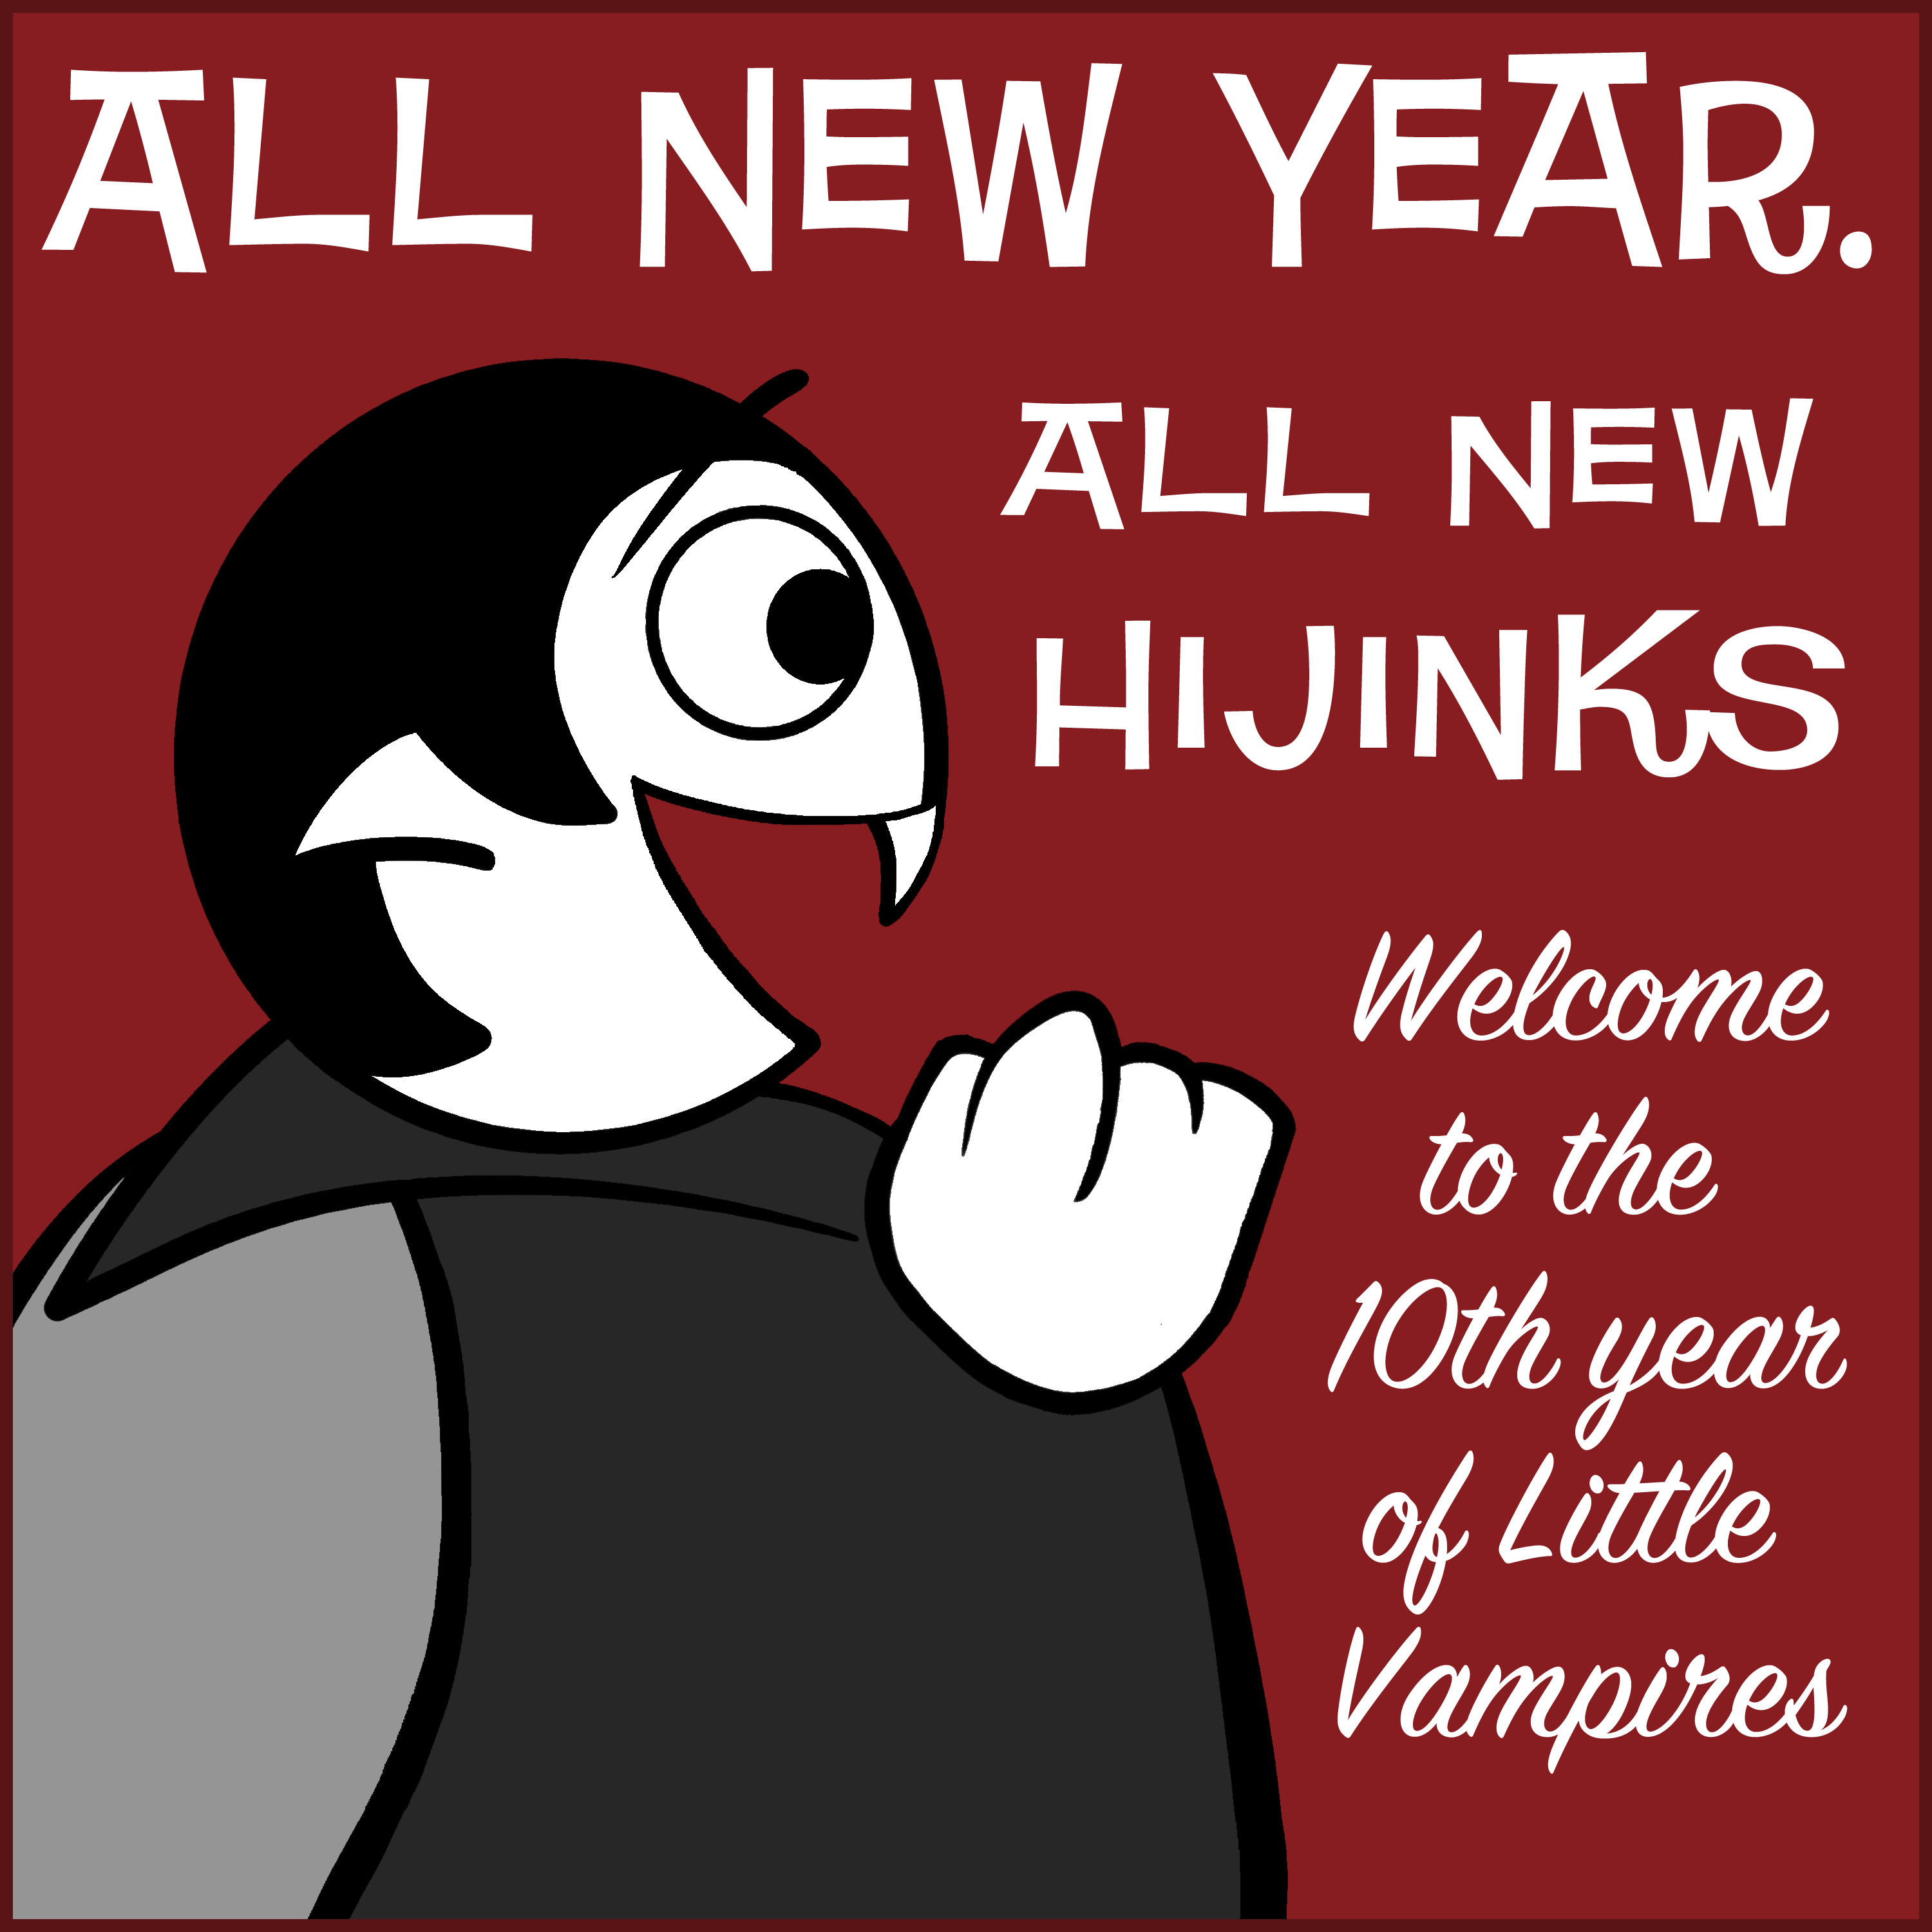 Drawing of an excited Little Vampire with the text “All new year. All new hijinks — welcome to the 10th year of Little Vampires